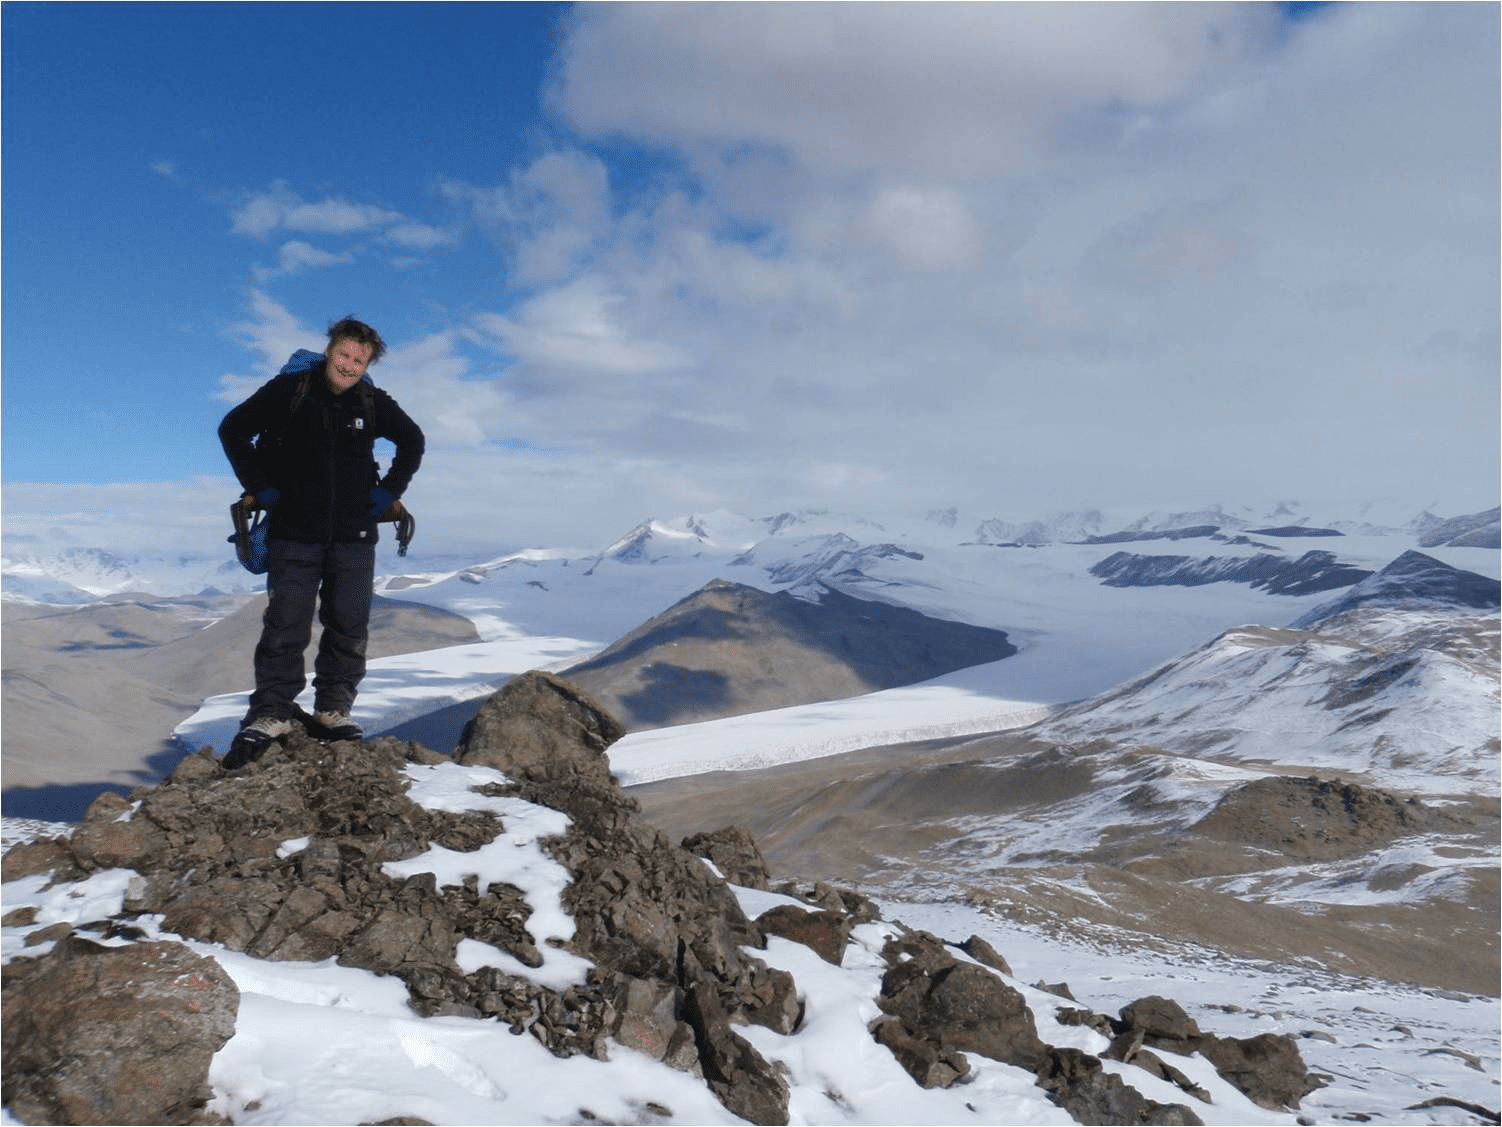  Dr Mark Stevens standing on a nunatak (rocky outcrop) overlooking Miers Valley, Antarctica